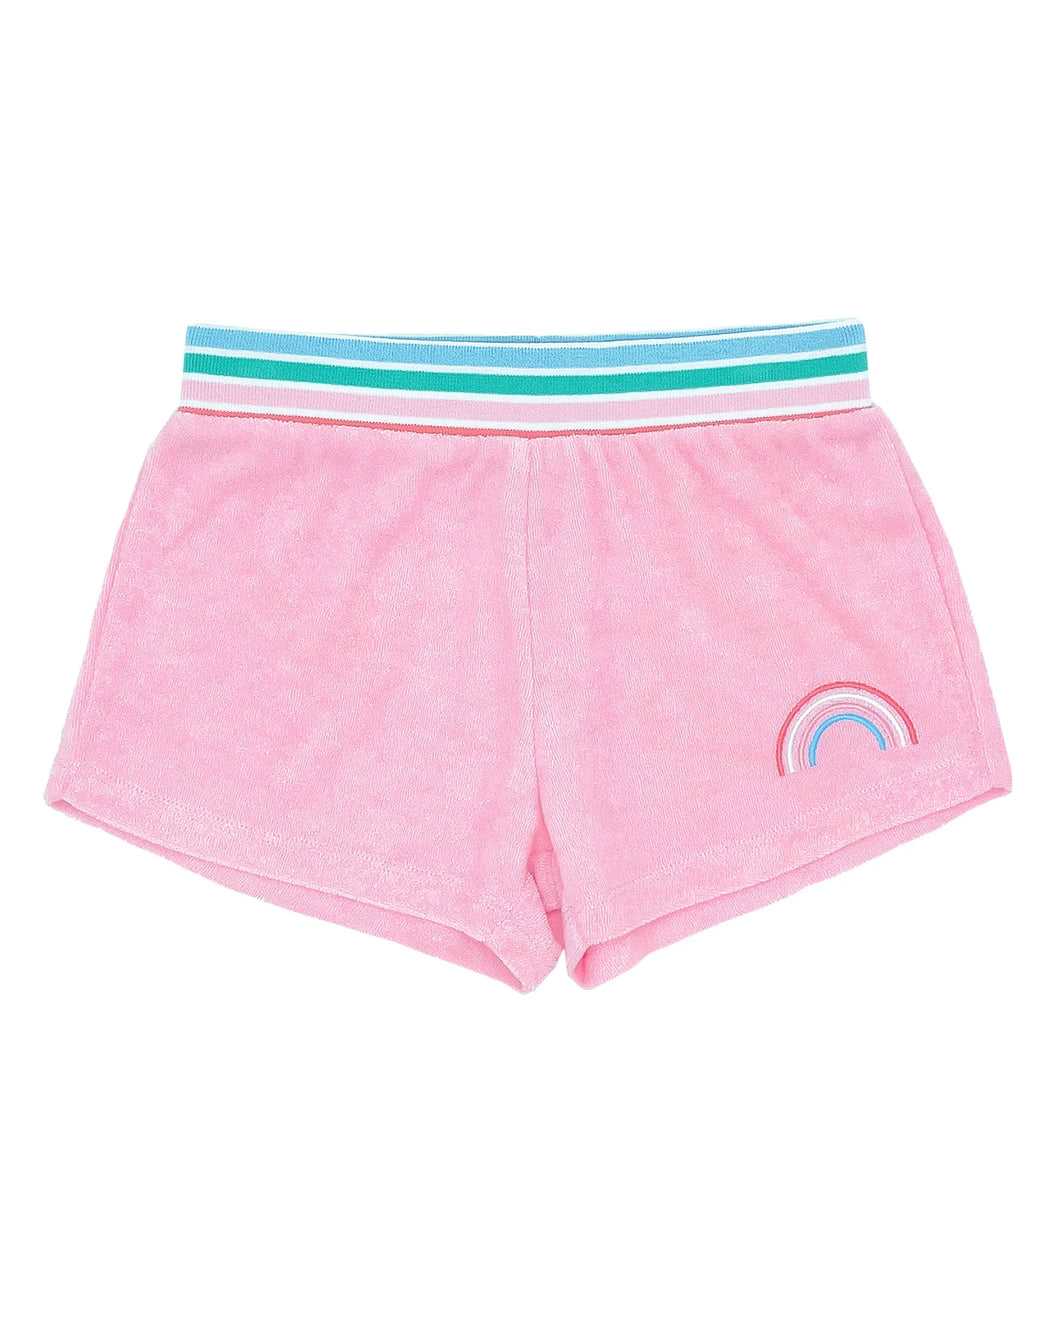 Feather 4 Arrow- Rivi Terry Shorts (Fairy Tale Pink, 8-14)